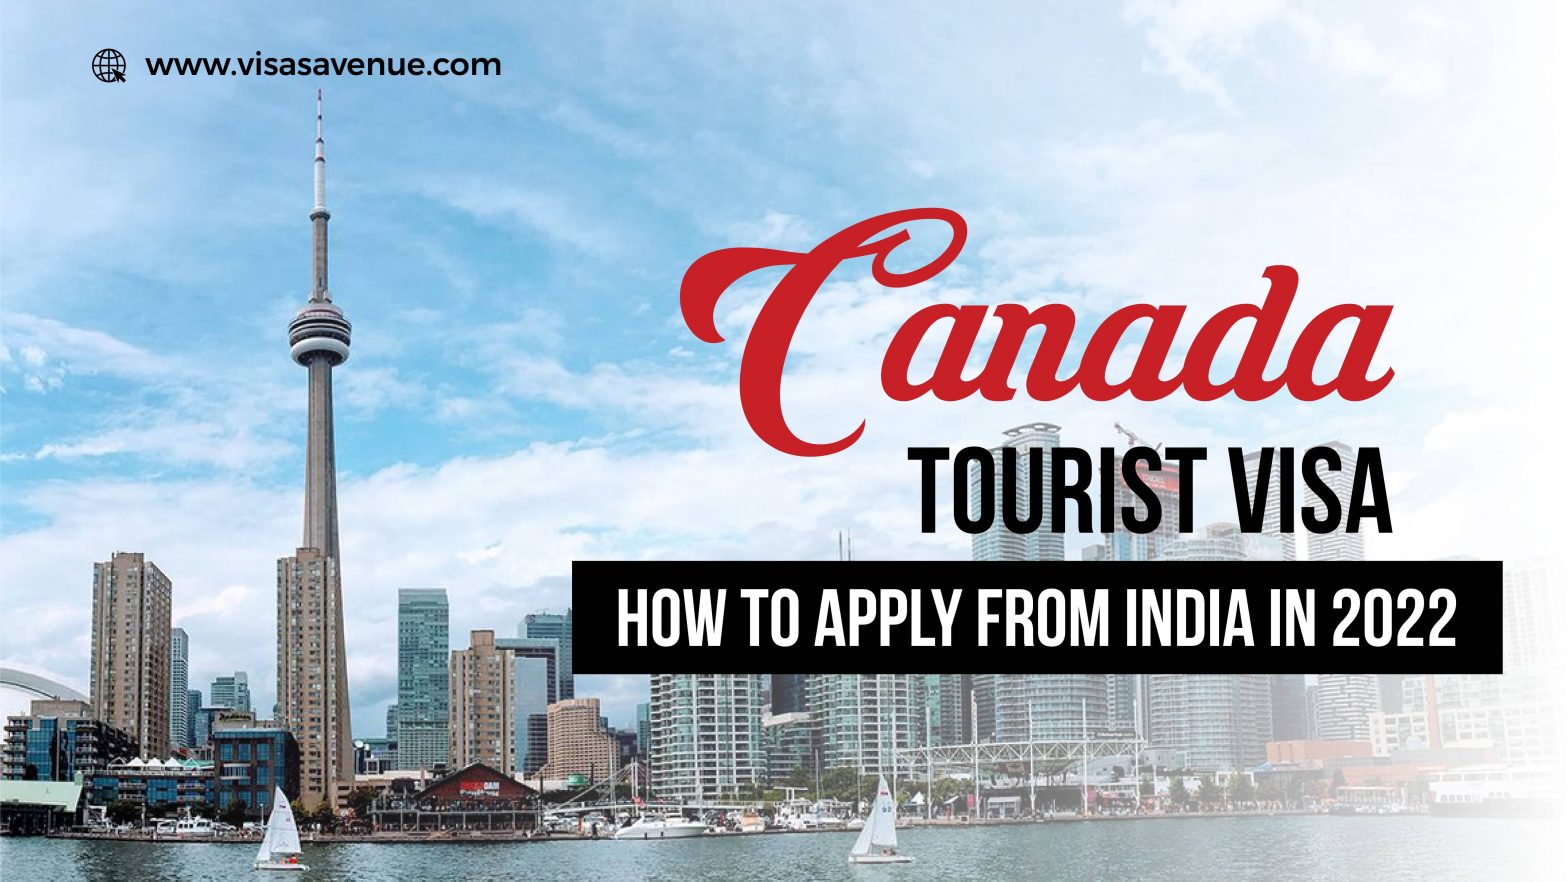 Canada Tourist Visa - How to Apply from India in 2022